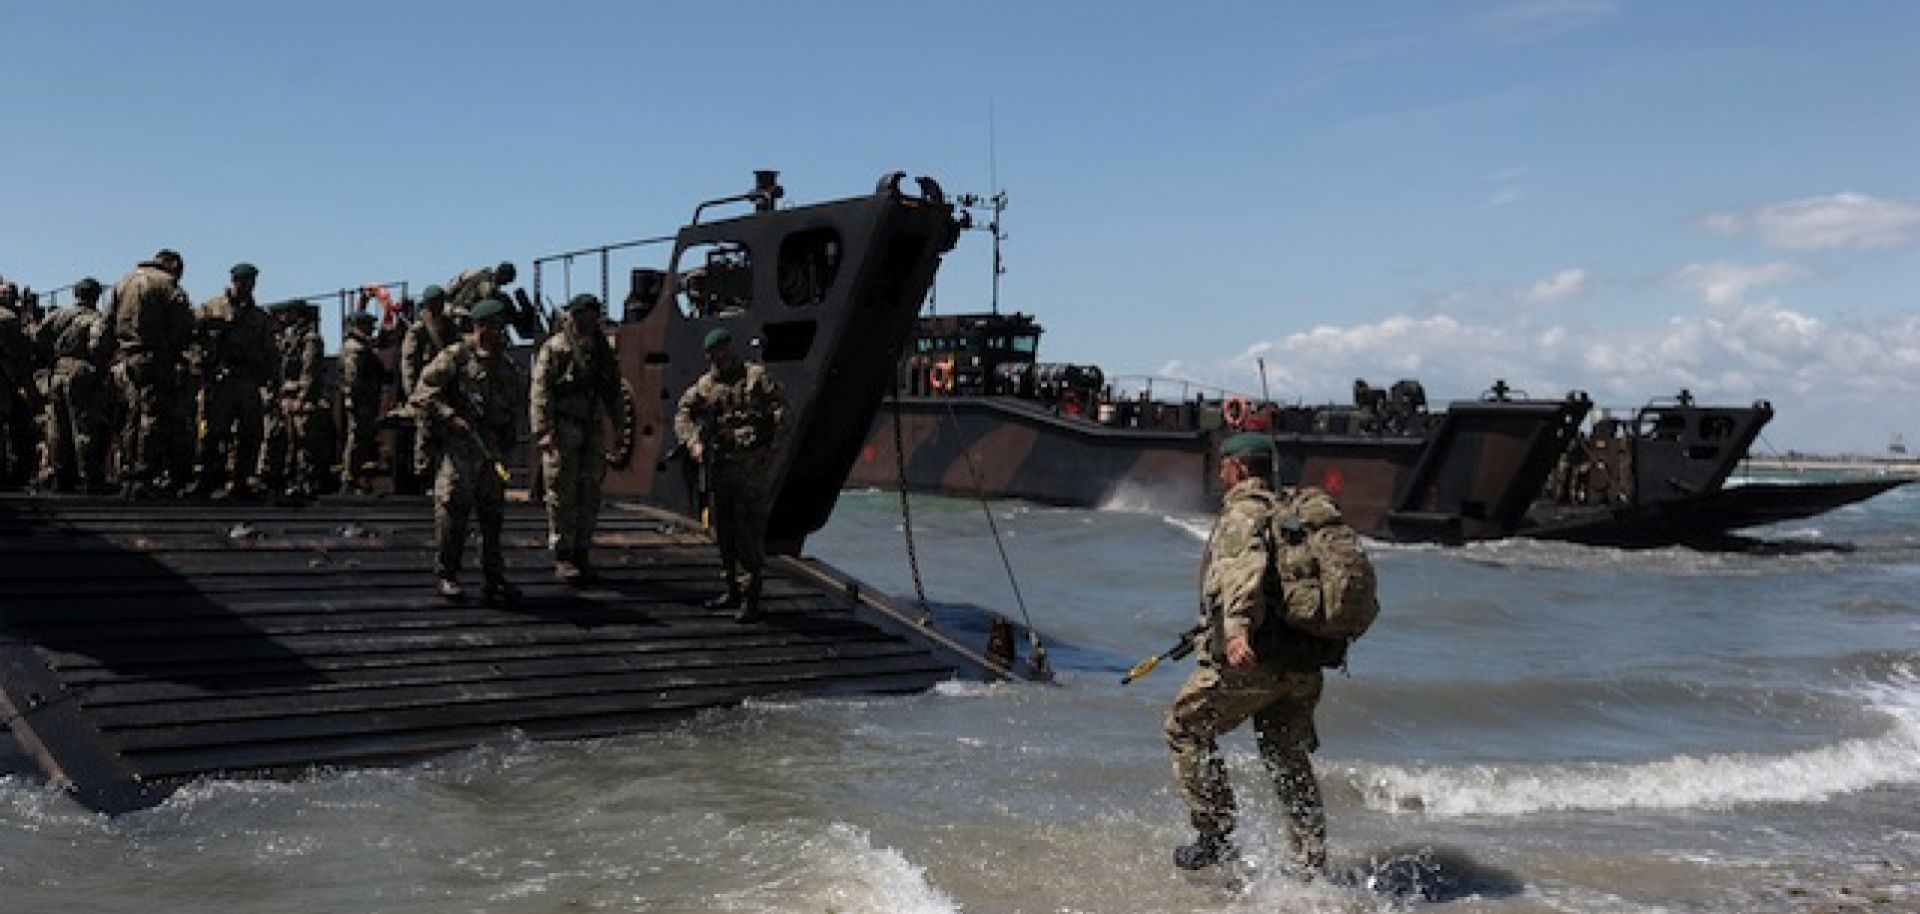 British Royal Marines demonstrate a beach landing during D-Day commemorations in Portsmouth on June 5, 2014. Seventy years after the largest seaborne invasion in history, technology has changed the way that invaders would conduct amphibious operations.